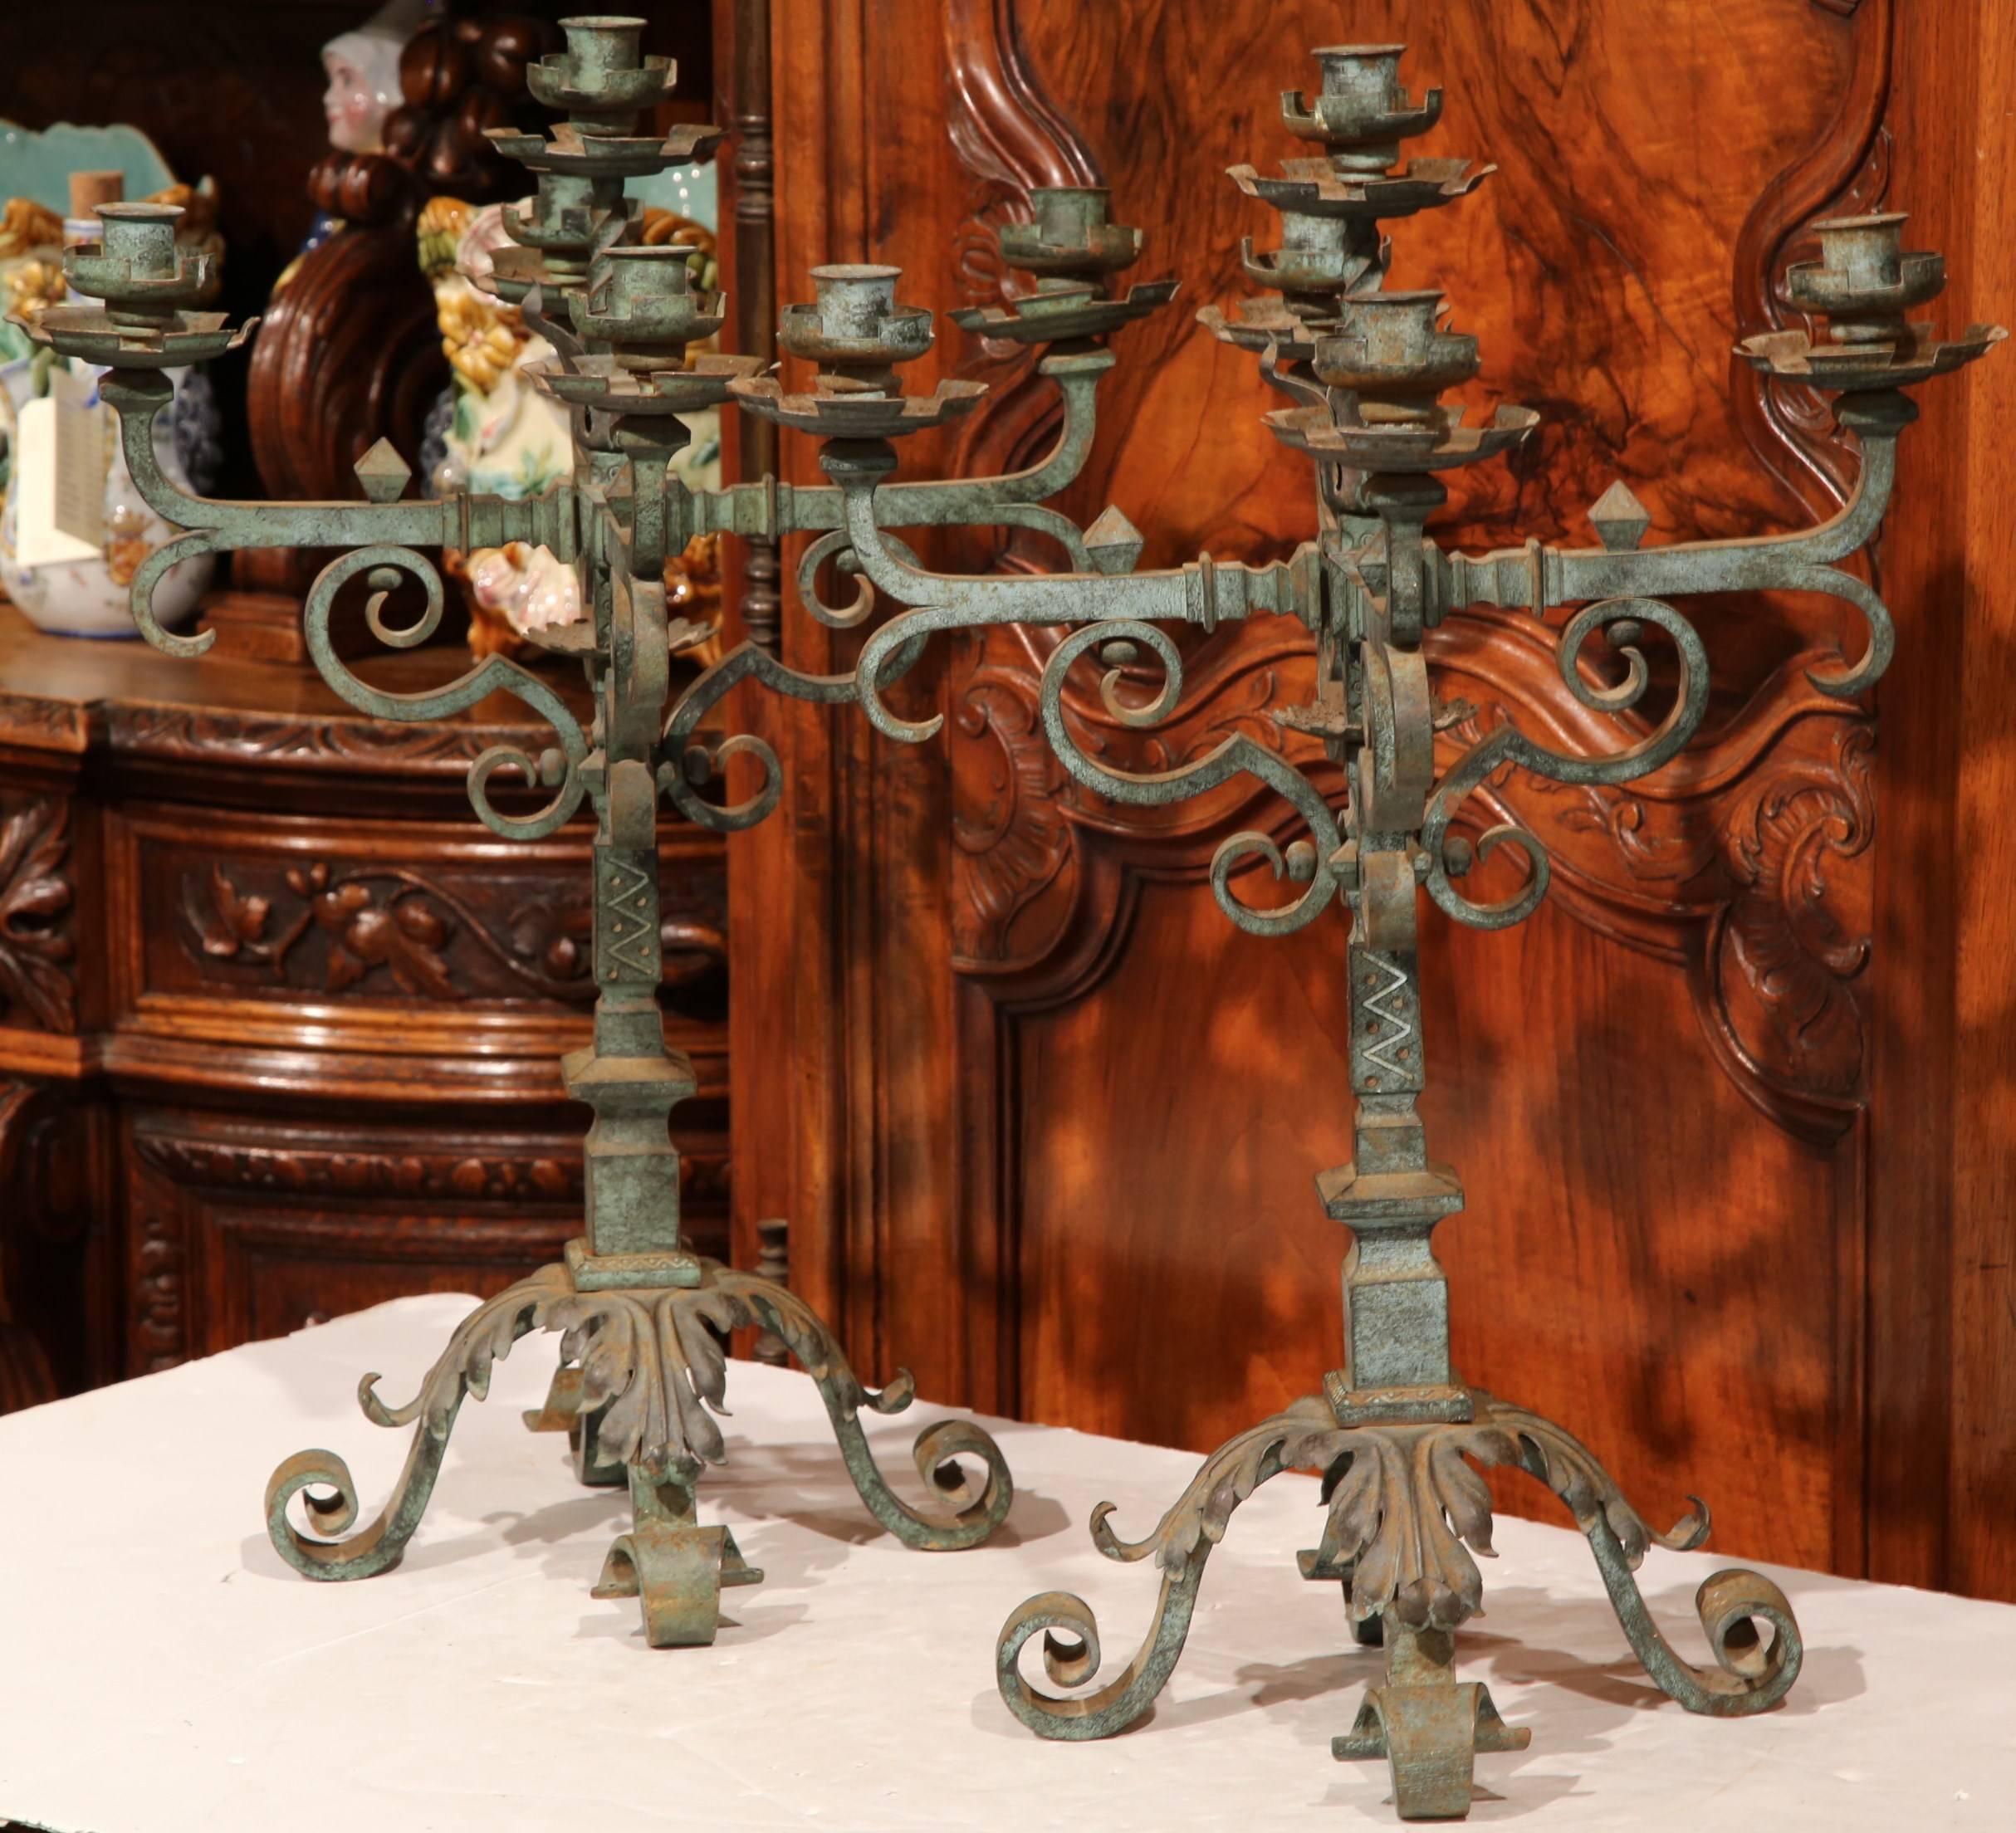 Heavy pair of antique Gothic hand-forged candelabras from a chateau in Dordogne, France, circa 1800. With four arms and a center one, each piece can hold five candles. Beautiful wrought iron work with original verdigris finish. Excellent condition.